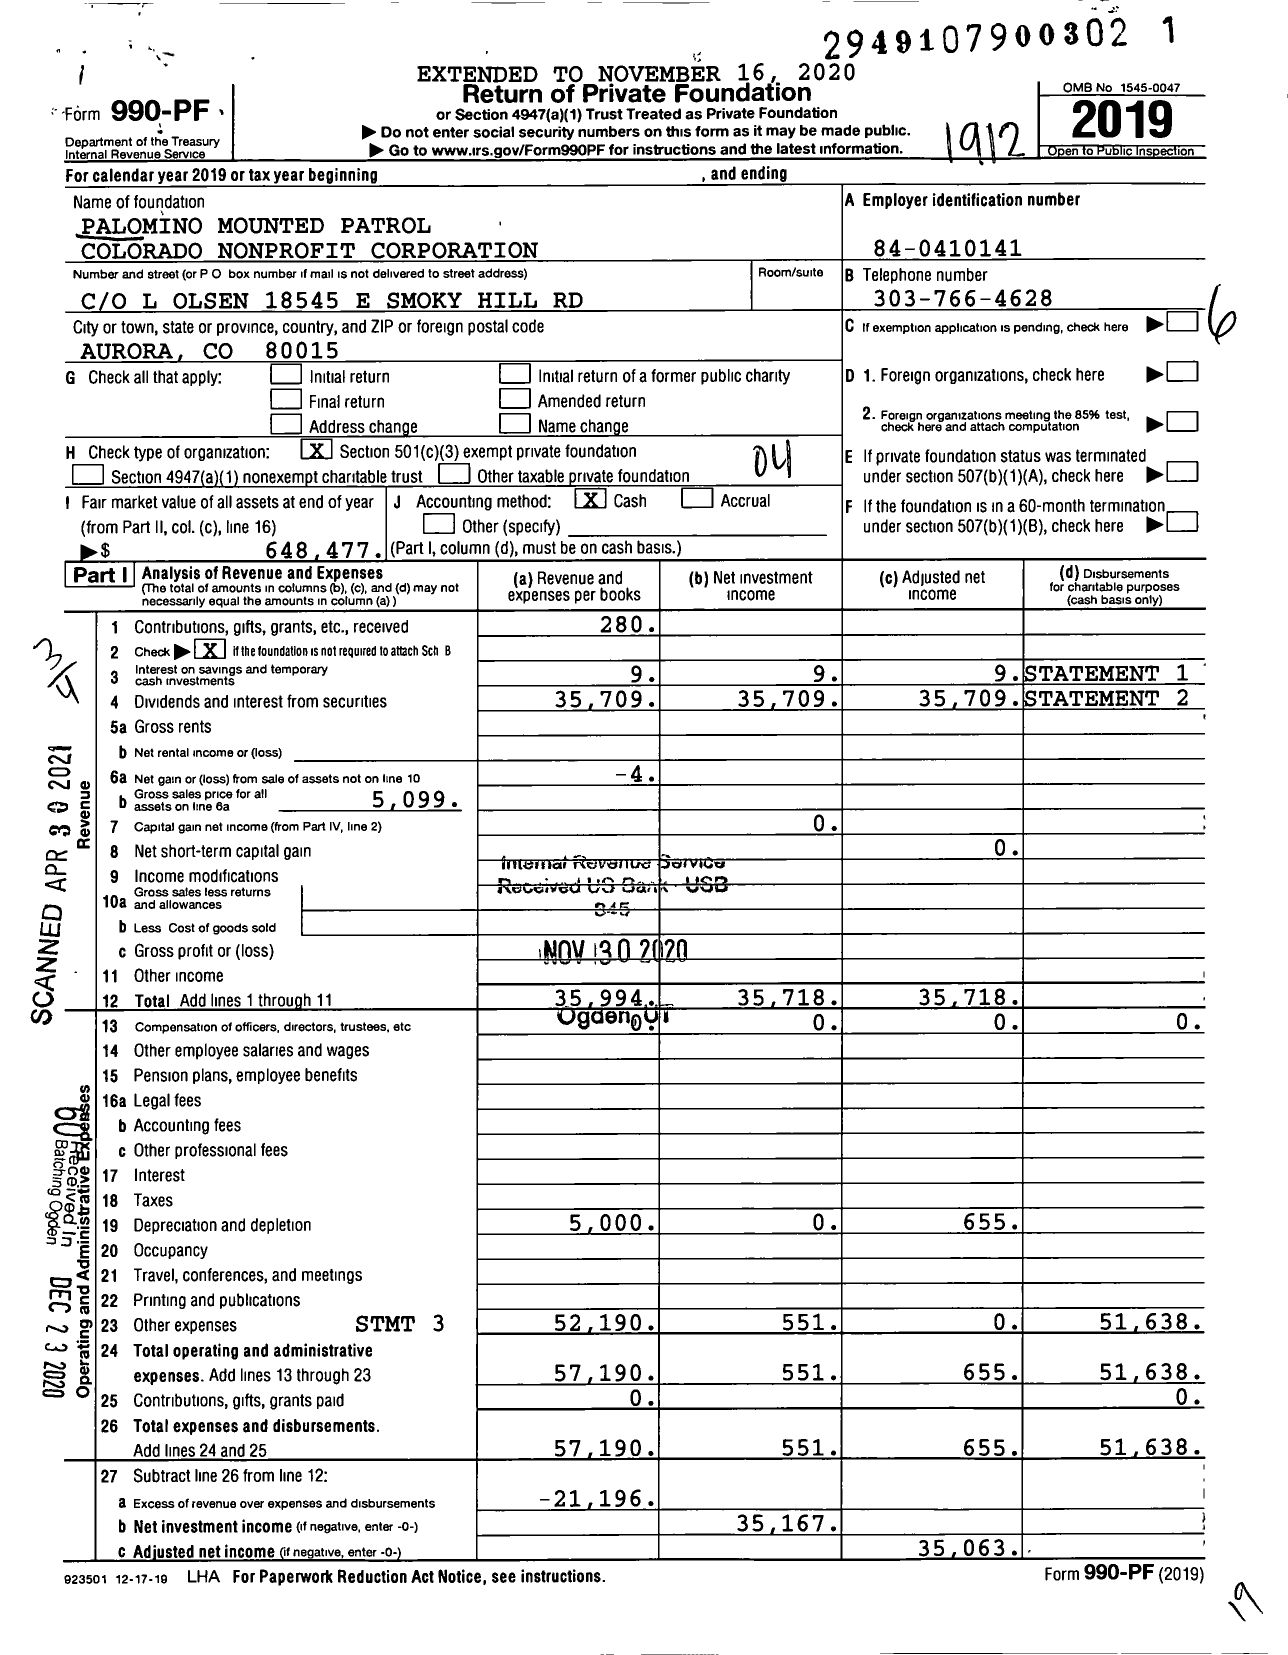 Image of first page of 2019 Form 990PF for Palomino Mounted Patrol Colorado Nonprofit Corporation